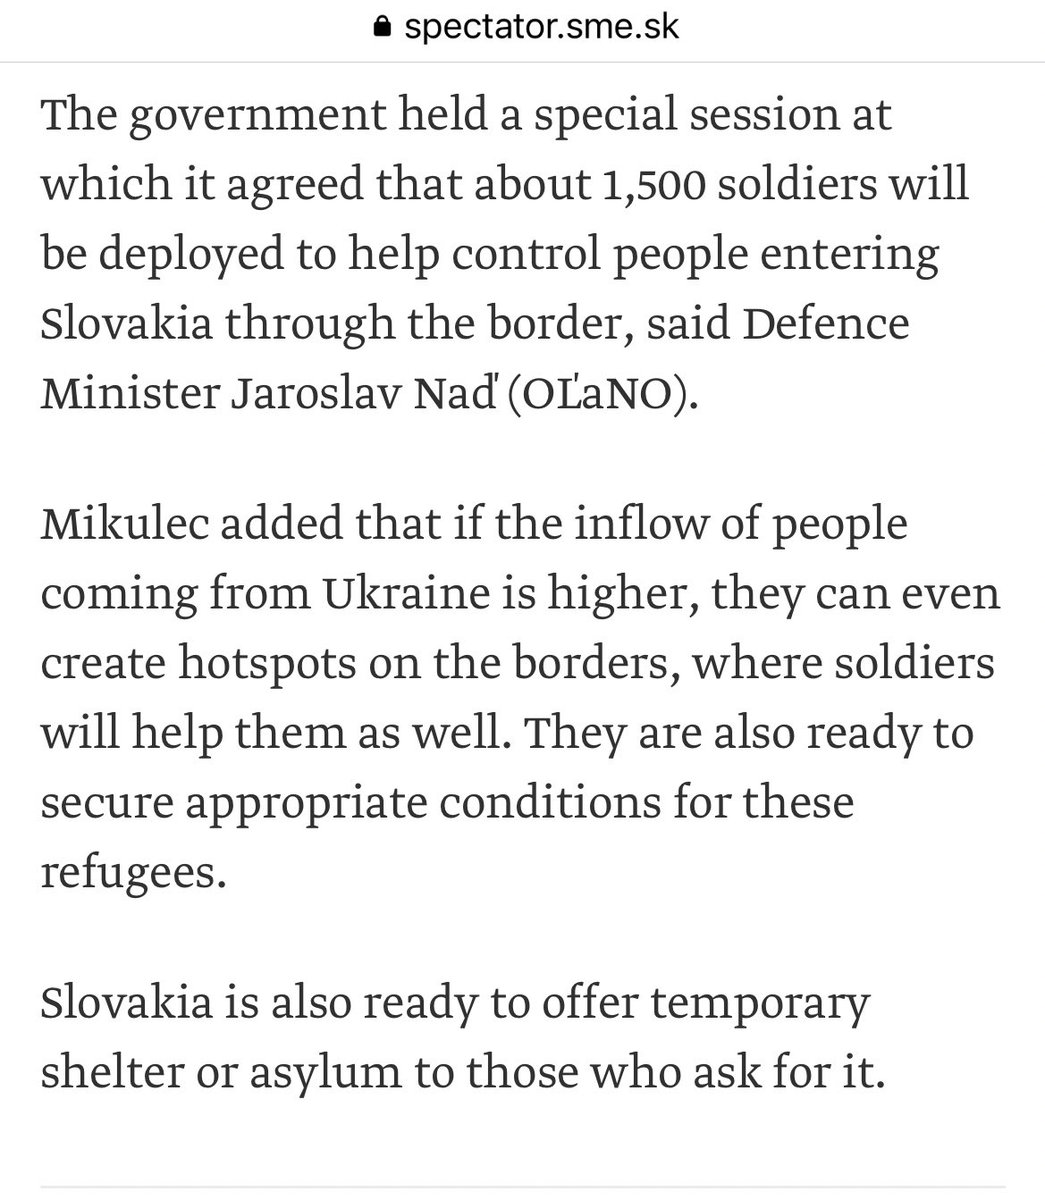 📢SLOVAKIA IS ACCEPTING CIVILIANS FROM UKRAINE 📢 at this state people can enter even without passports or IDs. Shelters will be provided as well as food and medical services. Stay safe❣️ #IStandWithUkraine 🇺🇦